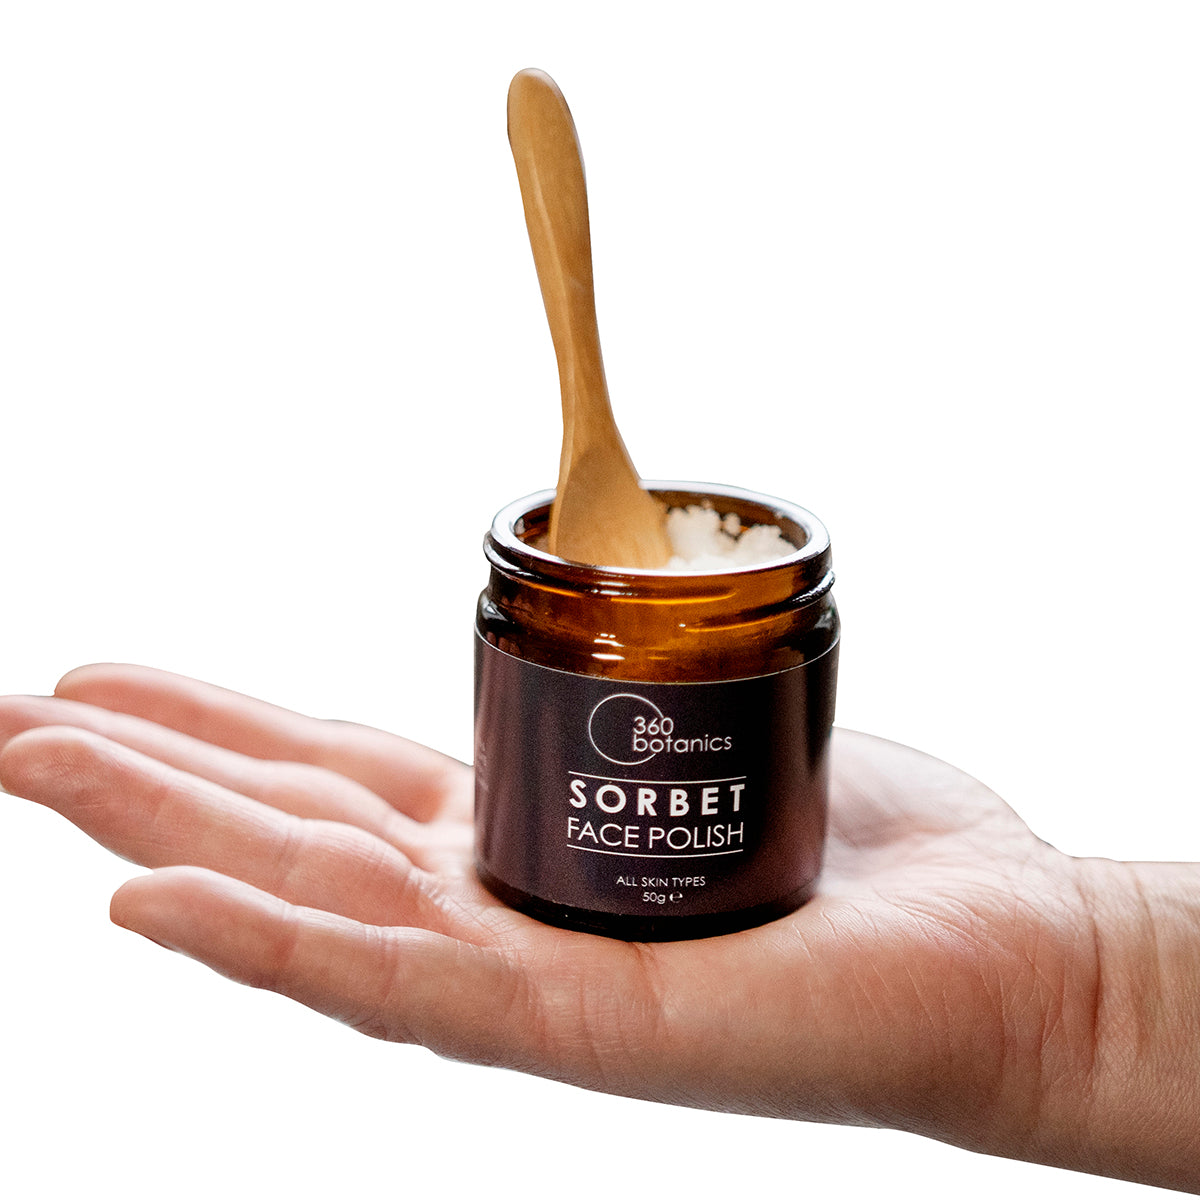 Sorbet face polish in amber jar on palm of hand, woodedn spoon coming out of jar, white backgroun